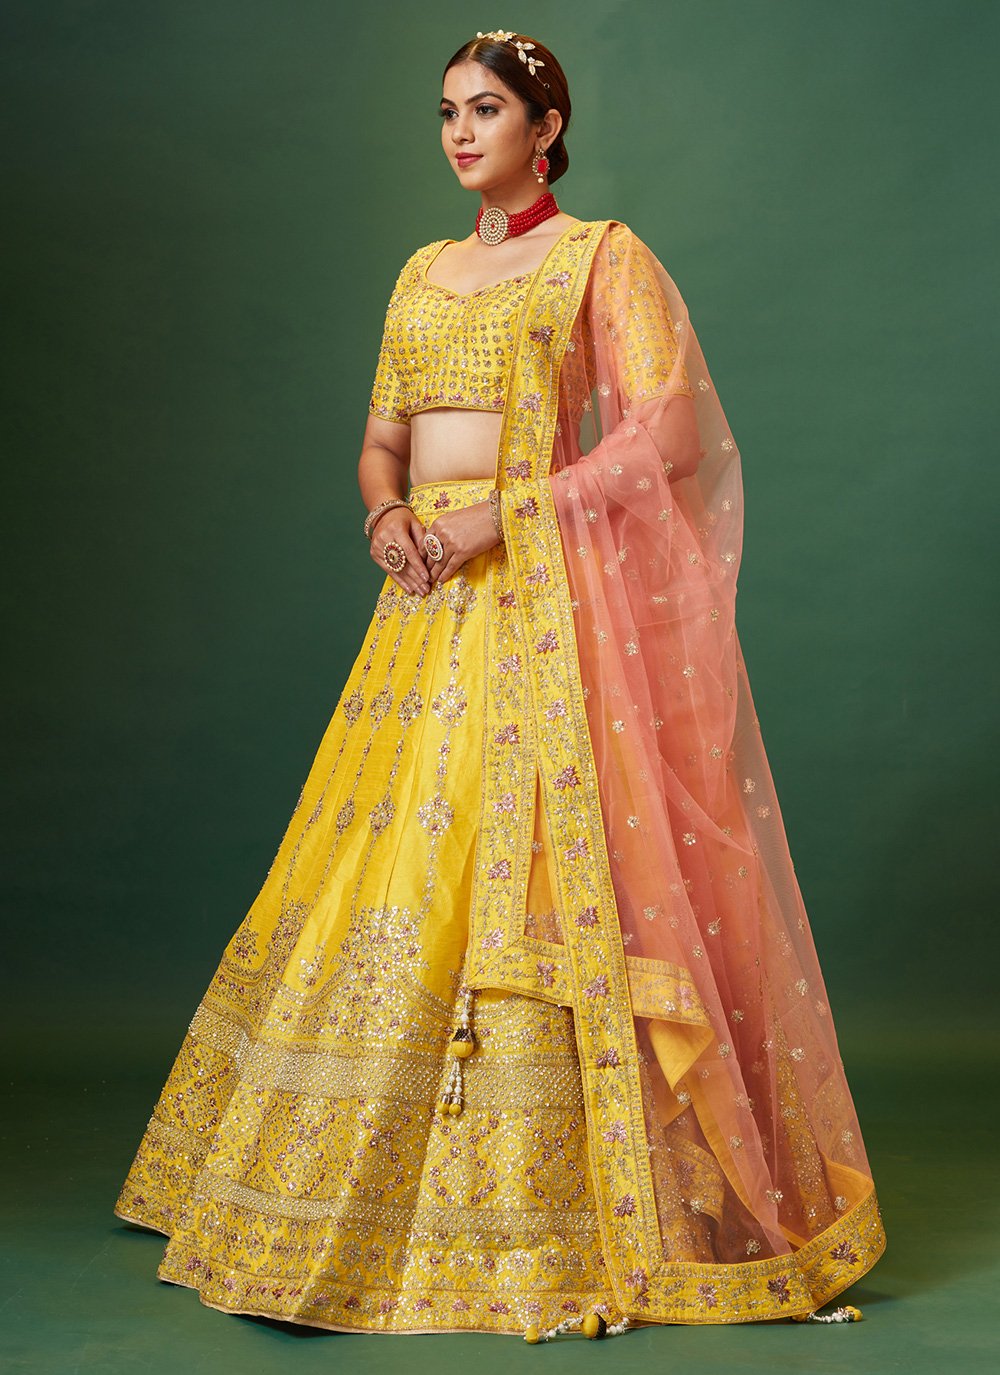 Designer Yellow Lehenga Matched With Pink Net Blouse ( Festival Discount)  #28714 | Buy Online @ DesiClik.com, USA